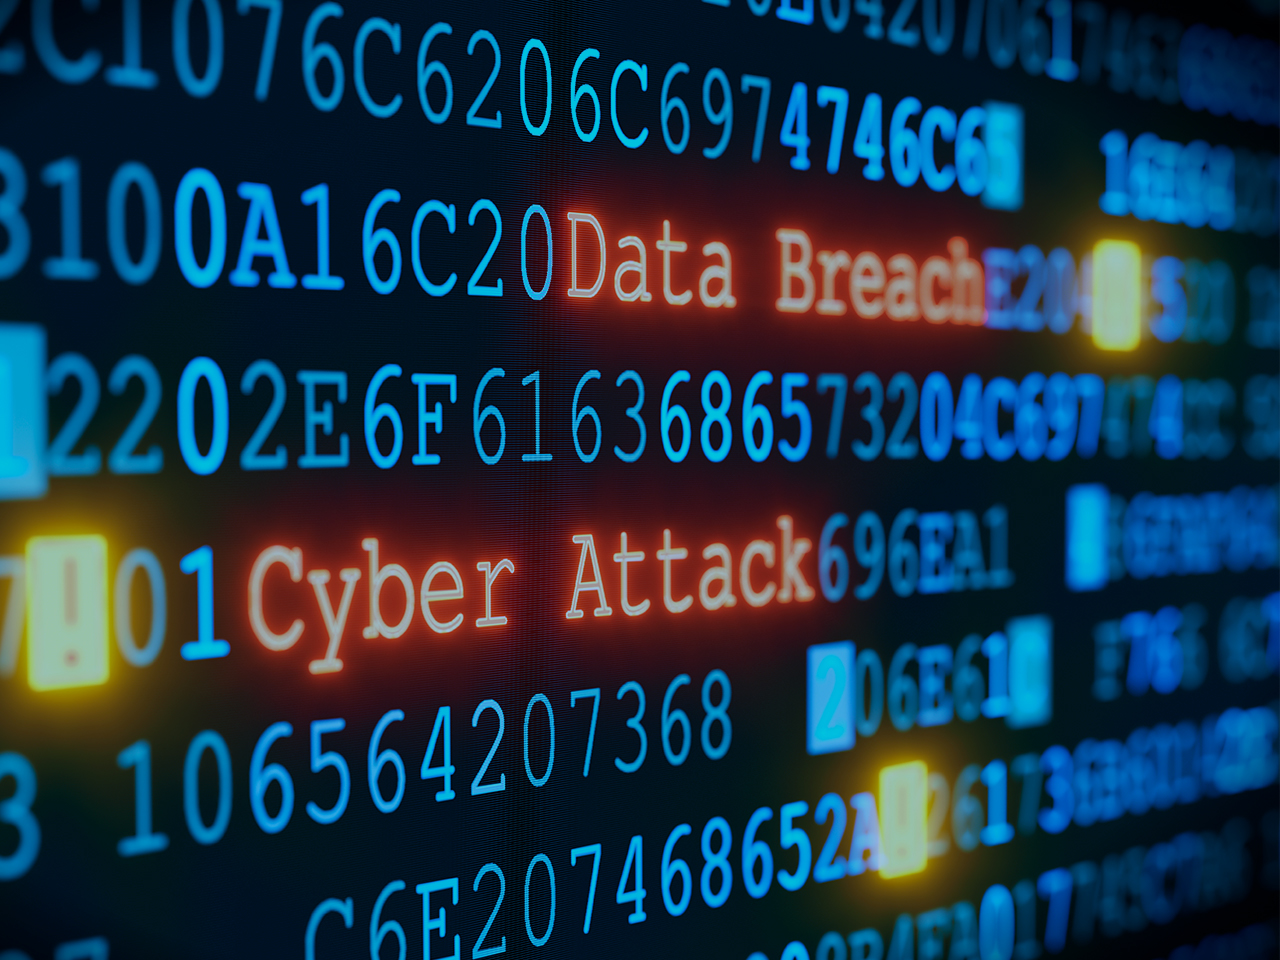 How much could a personal data breach cost your company?